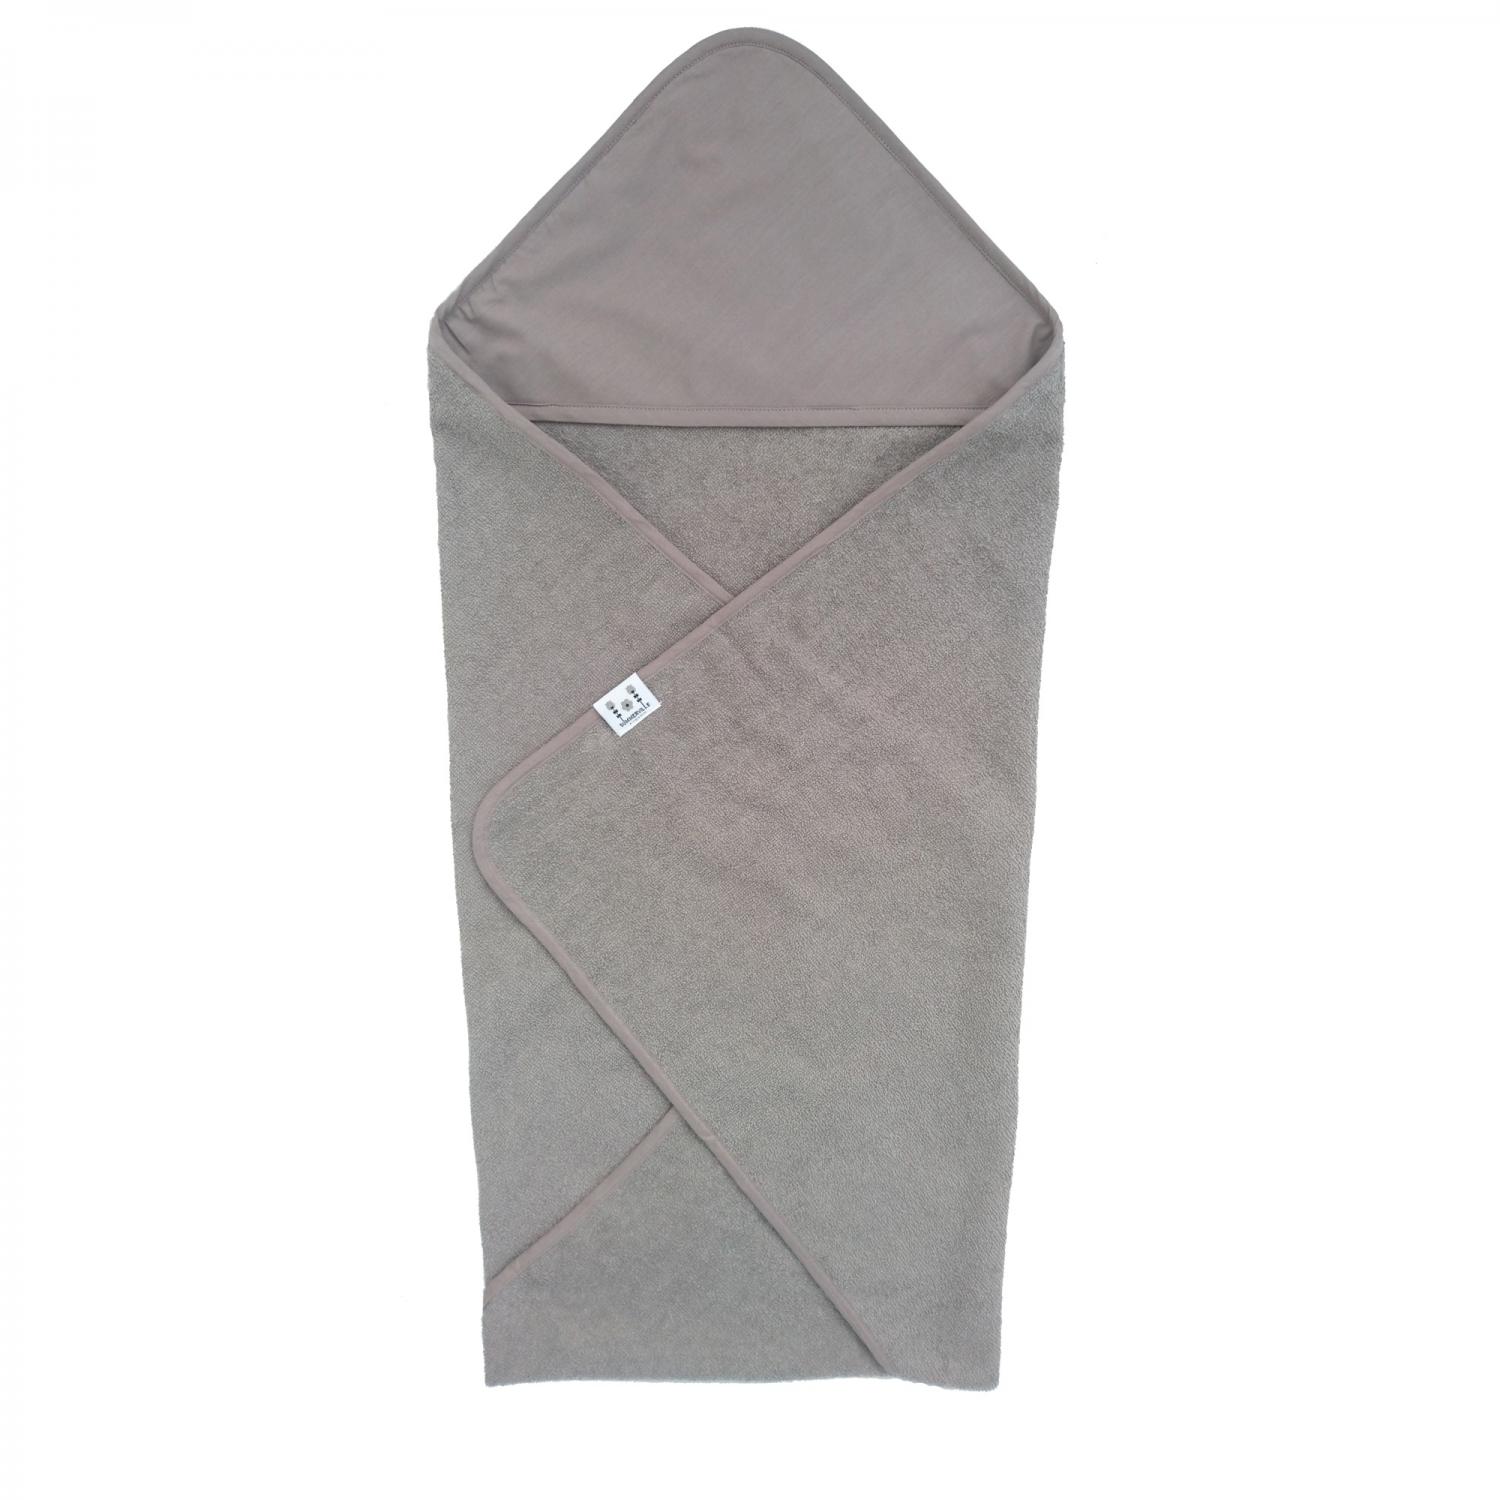 Hooded towel style grey GOTS